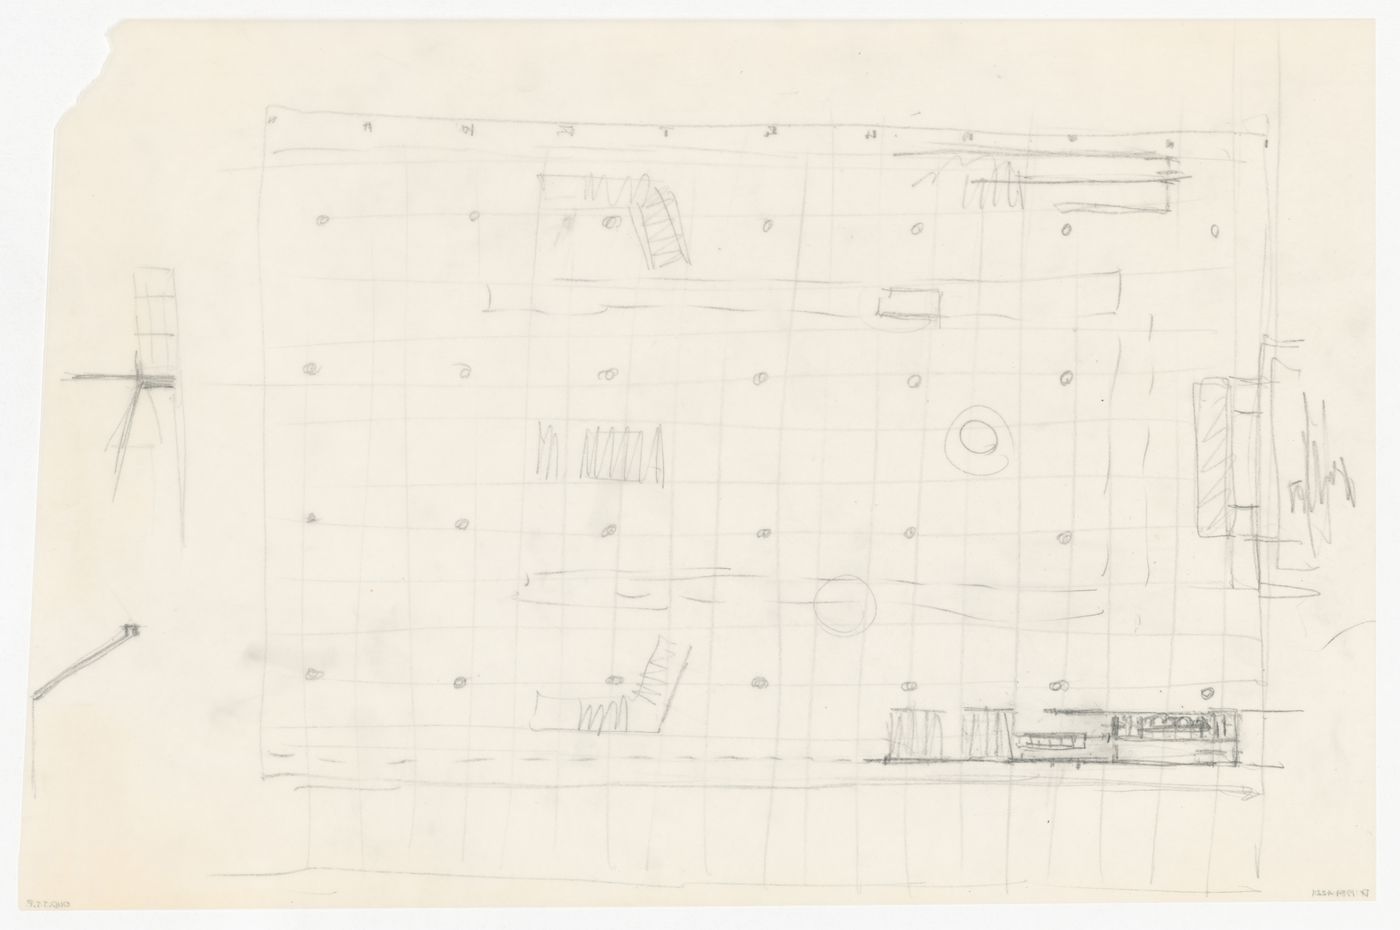 Sketch ground floor plan for the Congress Hall Complex, The Hague, Netherlands